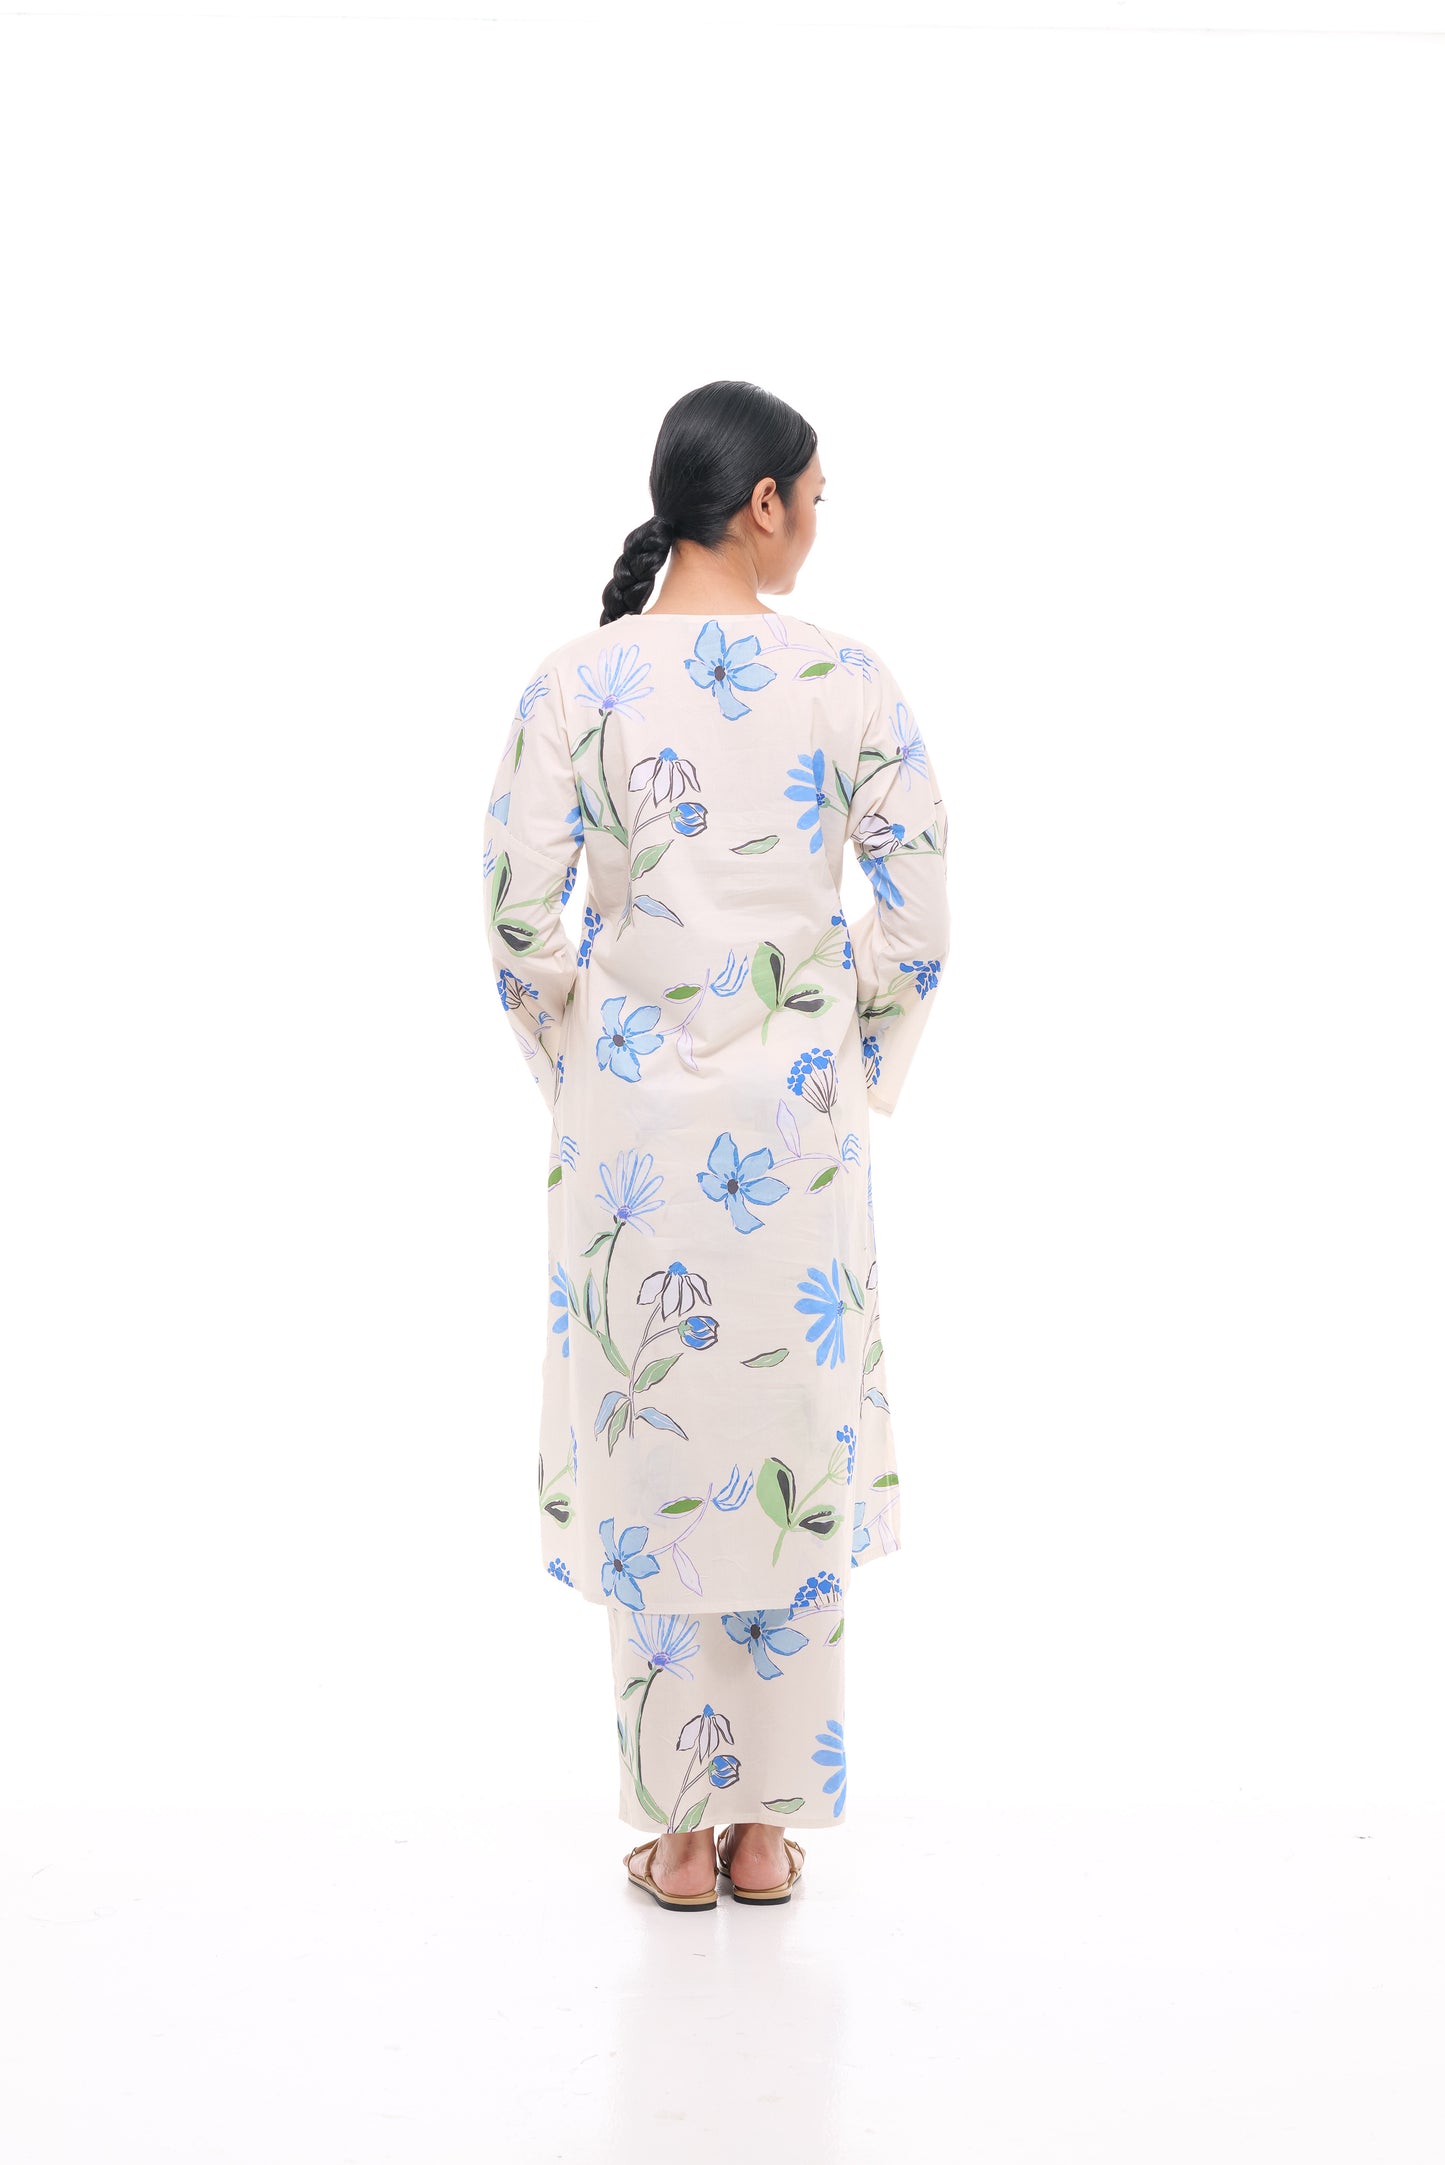 Jamilah Tunic in White and Blue